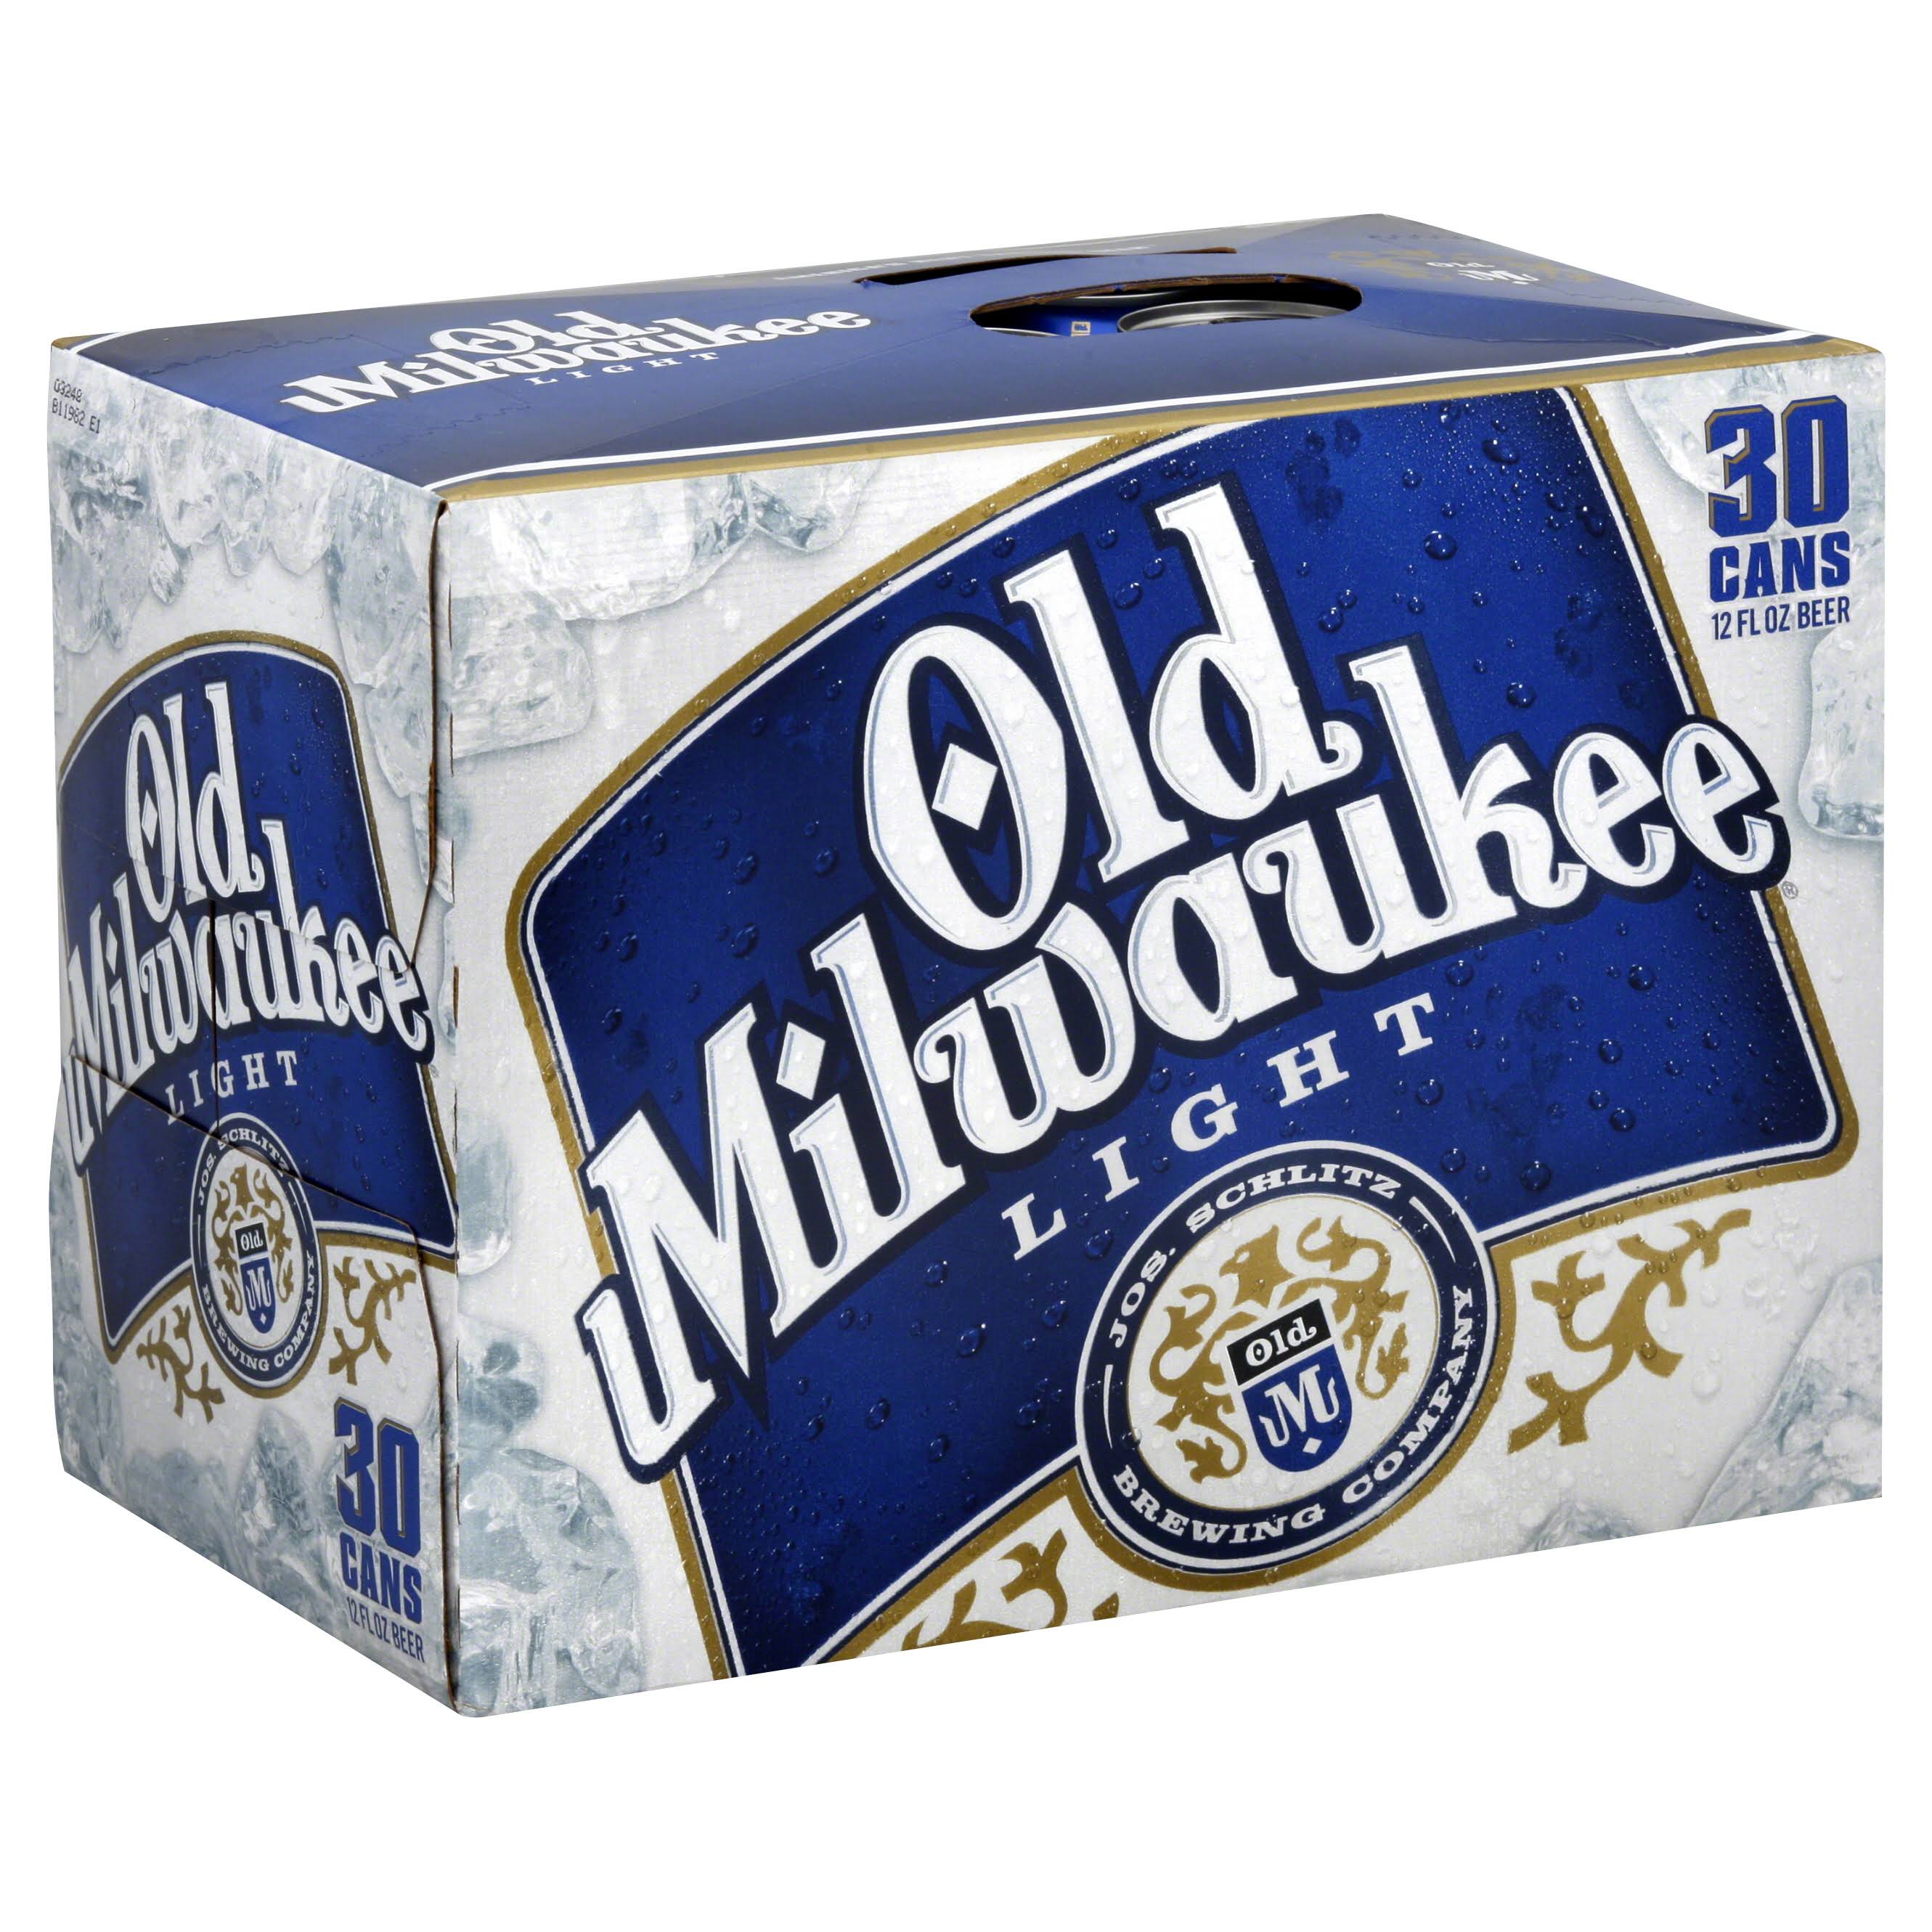 Old Milwaukee Light Beer - 12oz, 30 Cans